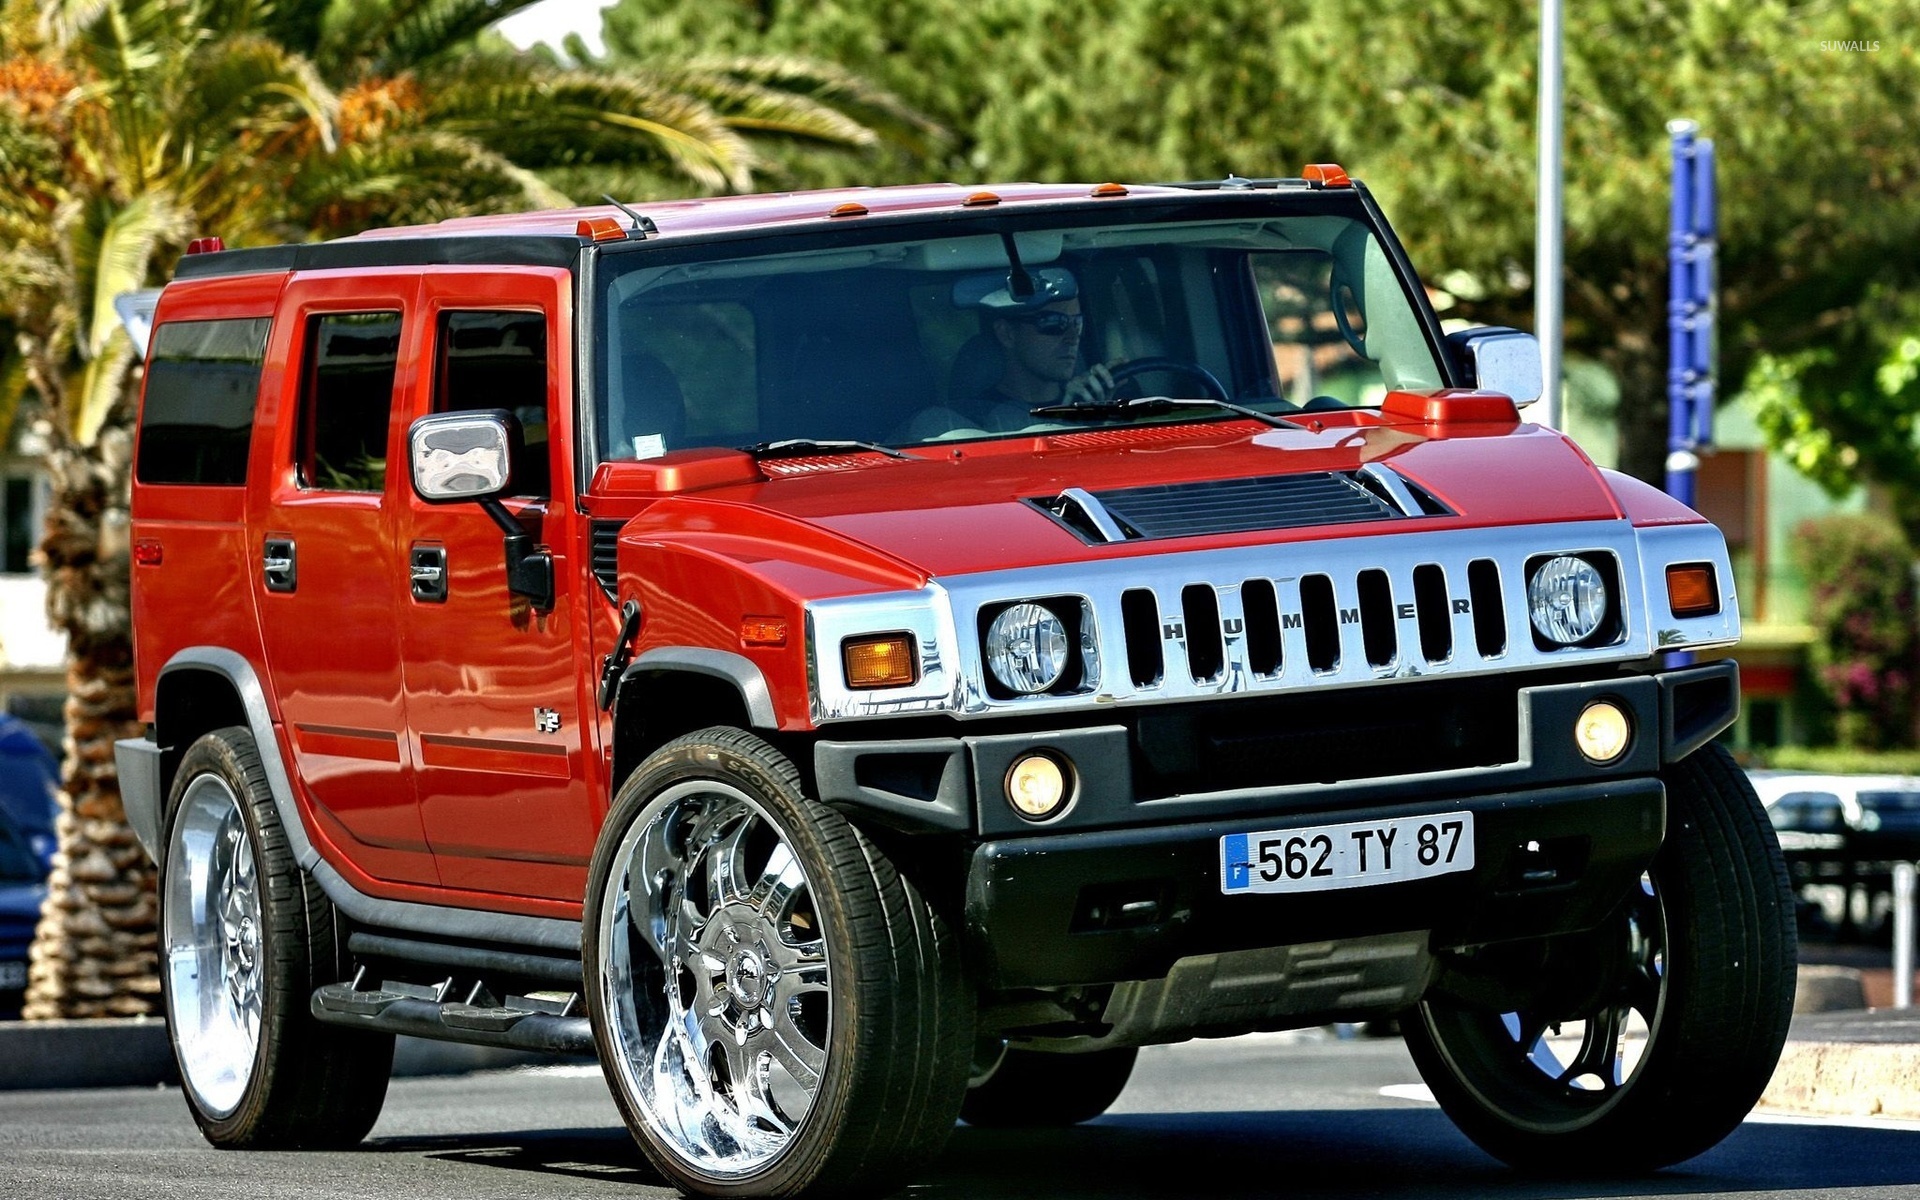 Hummer H2 Sut Wallpapers